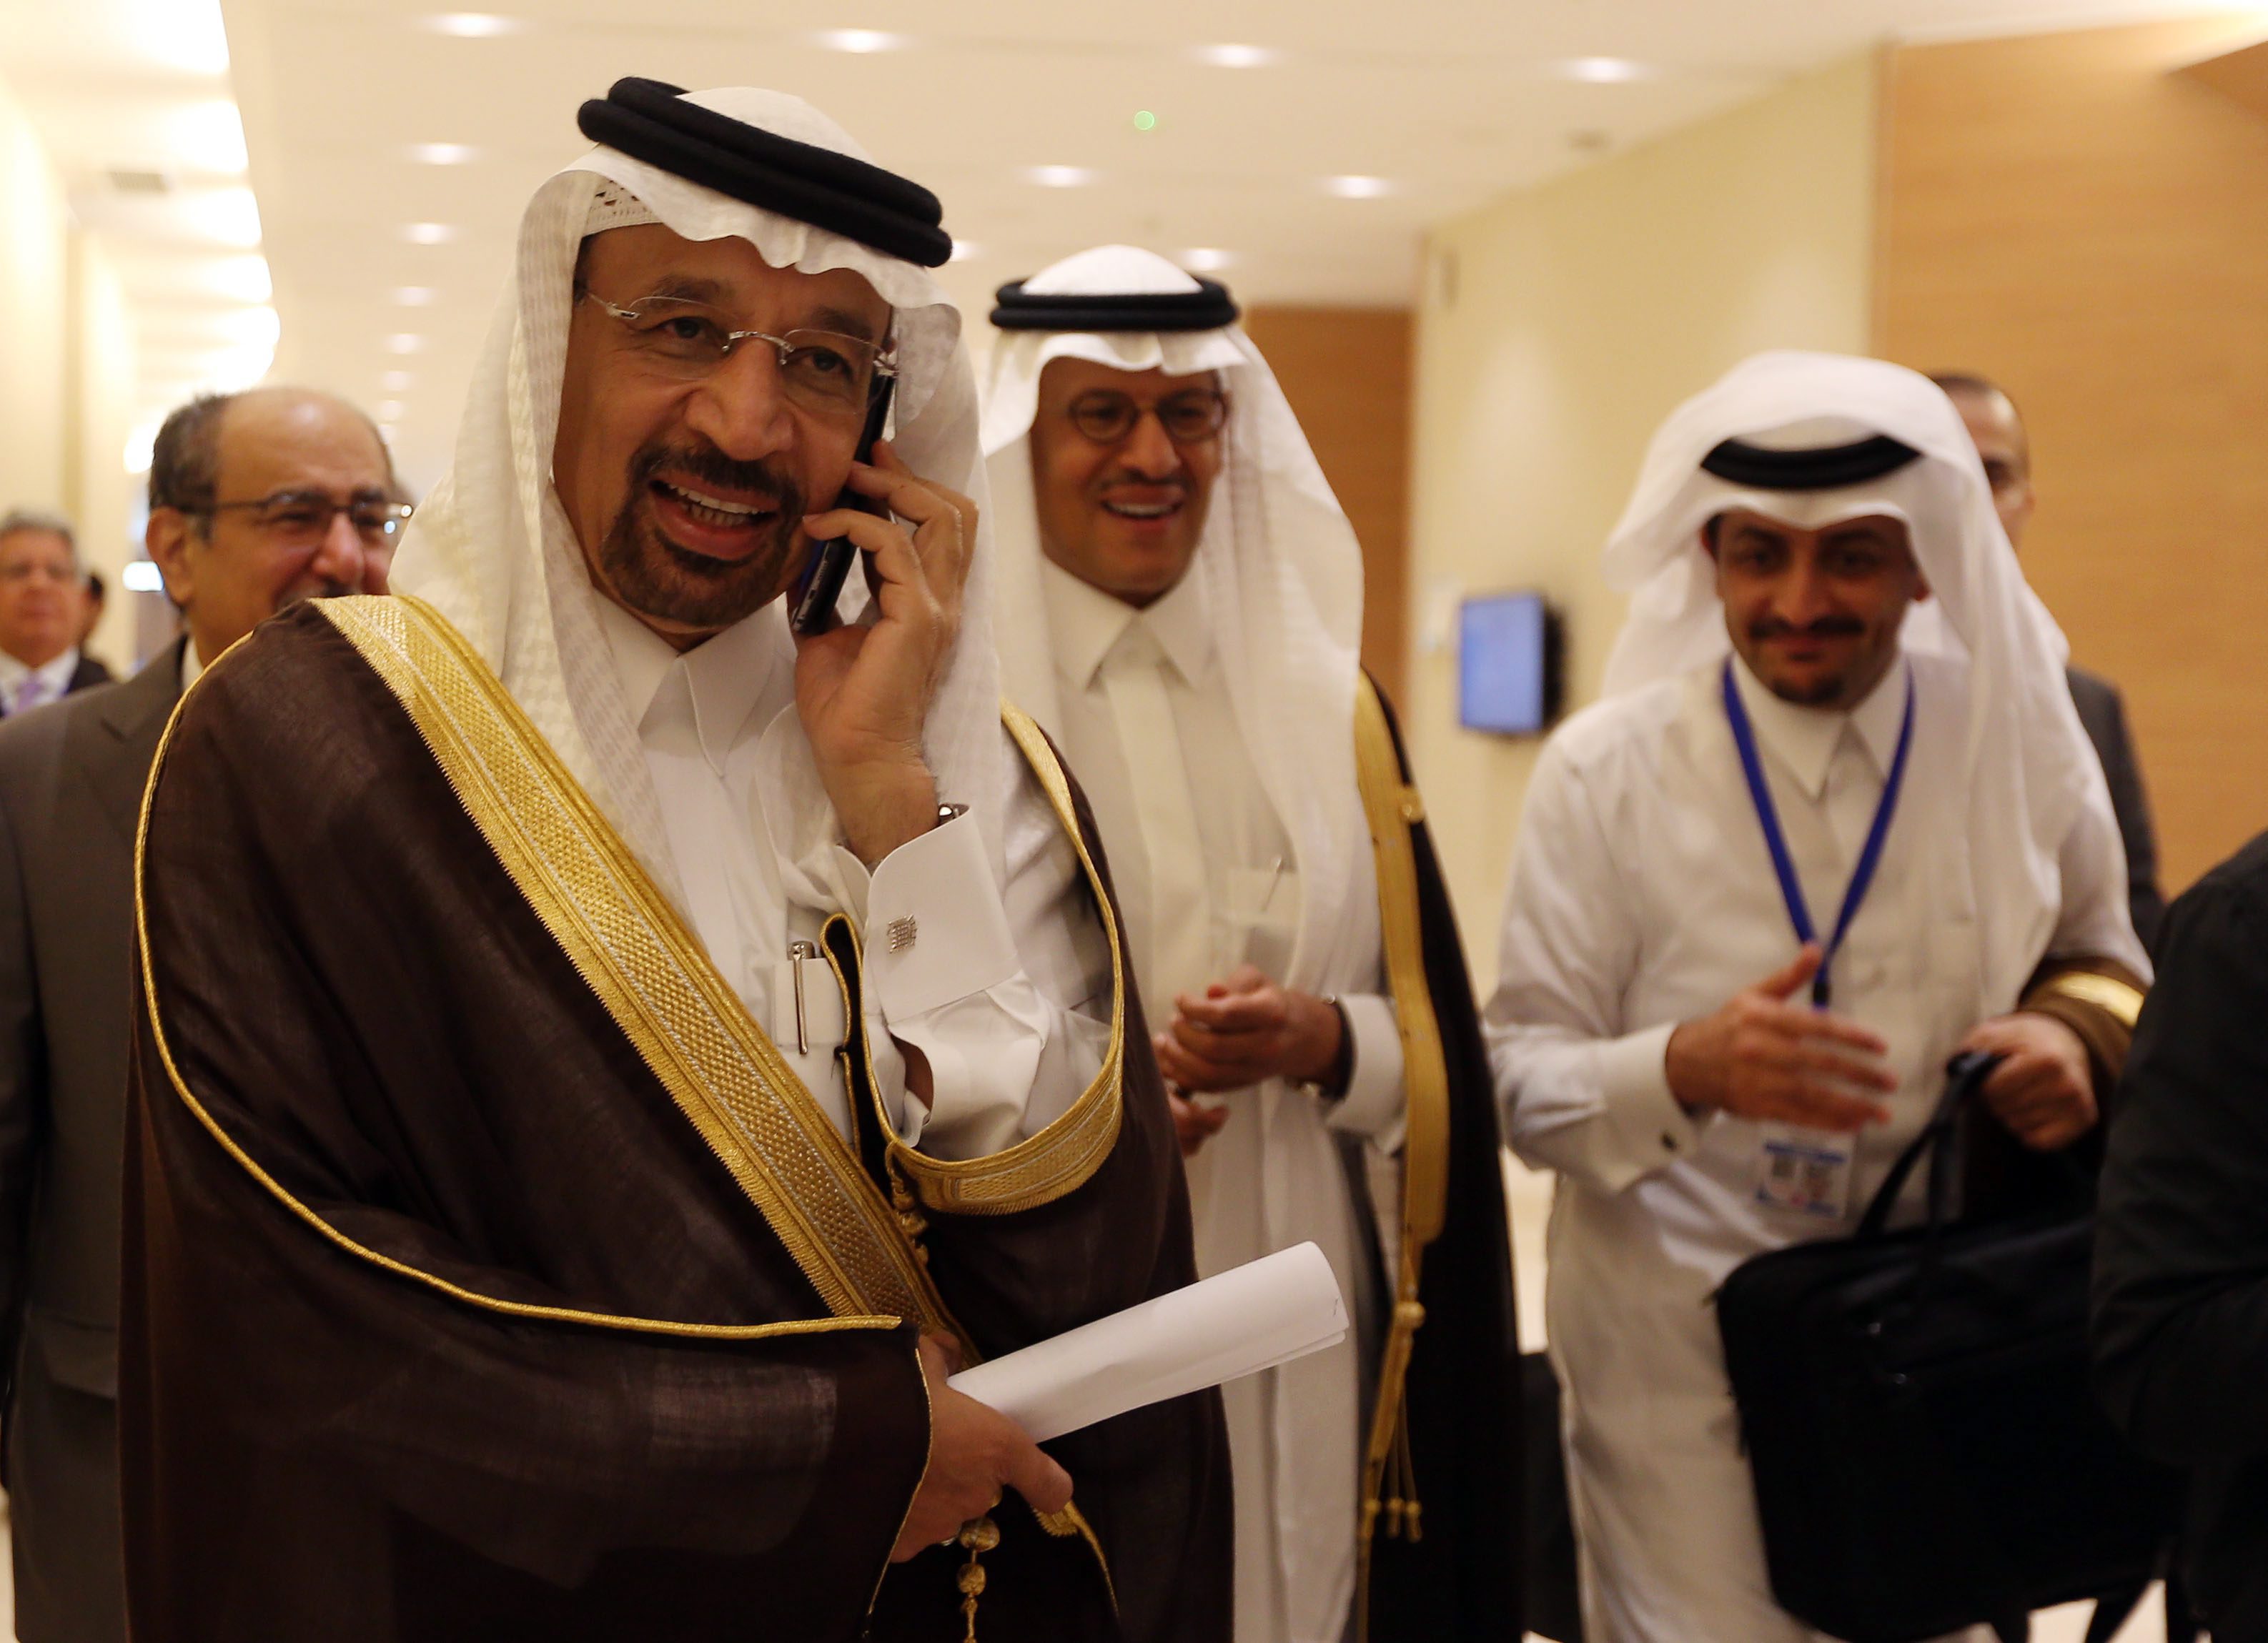 2016-09-28 14:16:16 epa05560107 Saudi Energy Minister Khaled al-Faleh (L) arrives to a session of the International Energy Forum and informal meeting of OPEC ministers at the congress palace in Algiers, Algeria, 28 September 2016. Algeria is hosting the 15th International Energy Forum (IEF15) between 26 and 28 September. Members of the Organization of the Petroleum Exporting Countries (OPEC) will reportedly have talks in Algeria on the sideline of the meeting. EPA/MOHAMED MESSARA